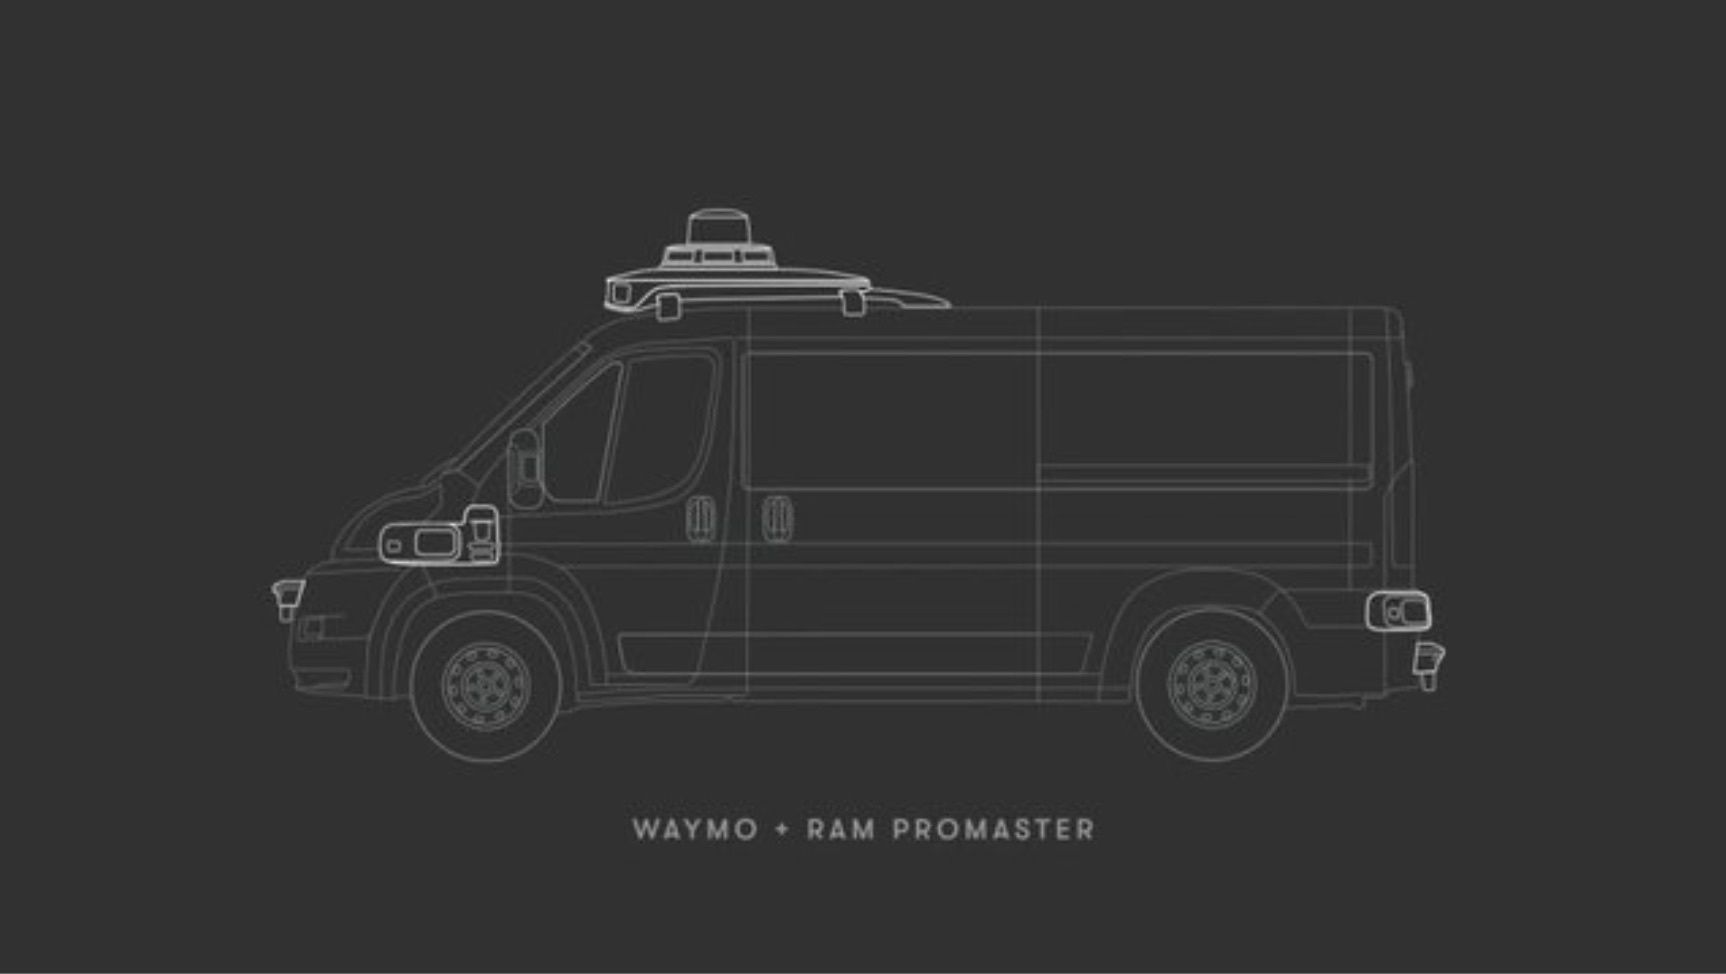 Ram ProMaster delivery van with Waymo driverless technology